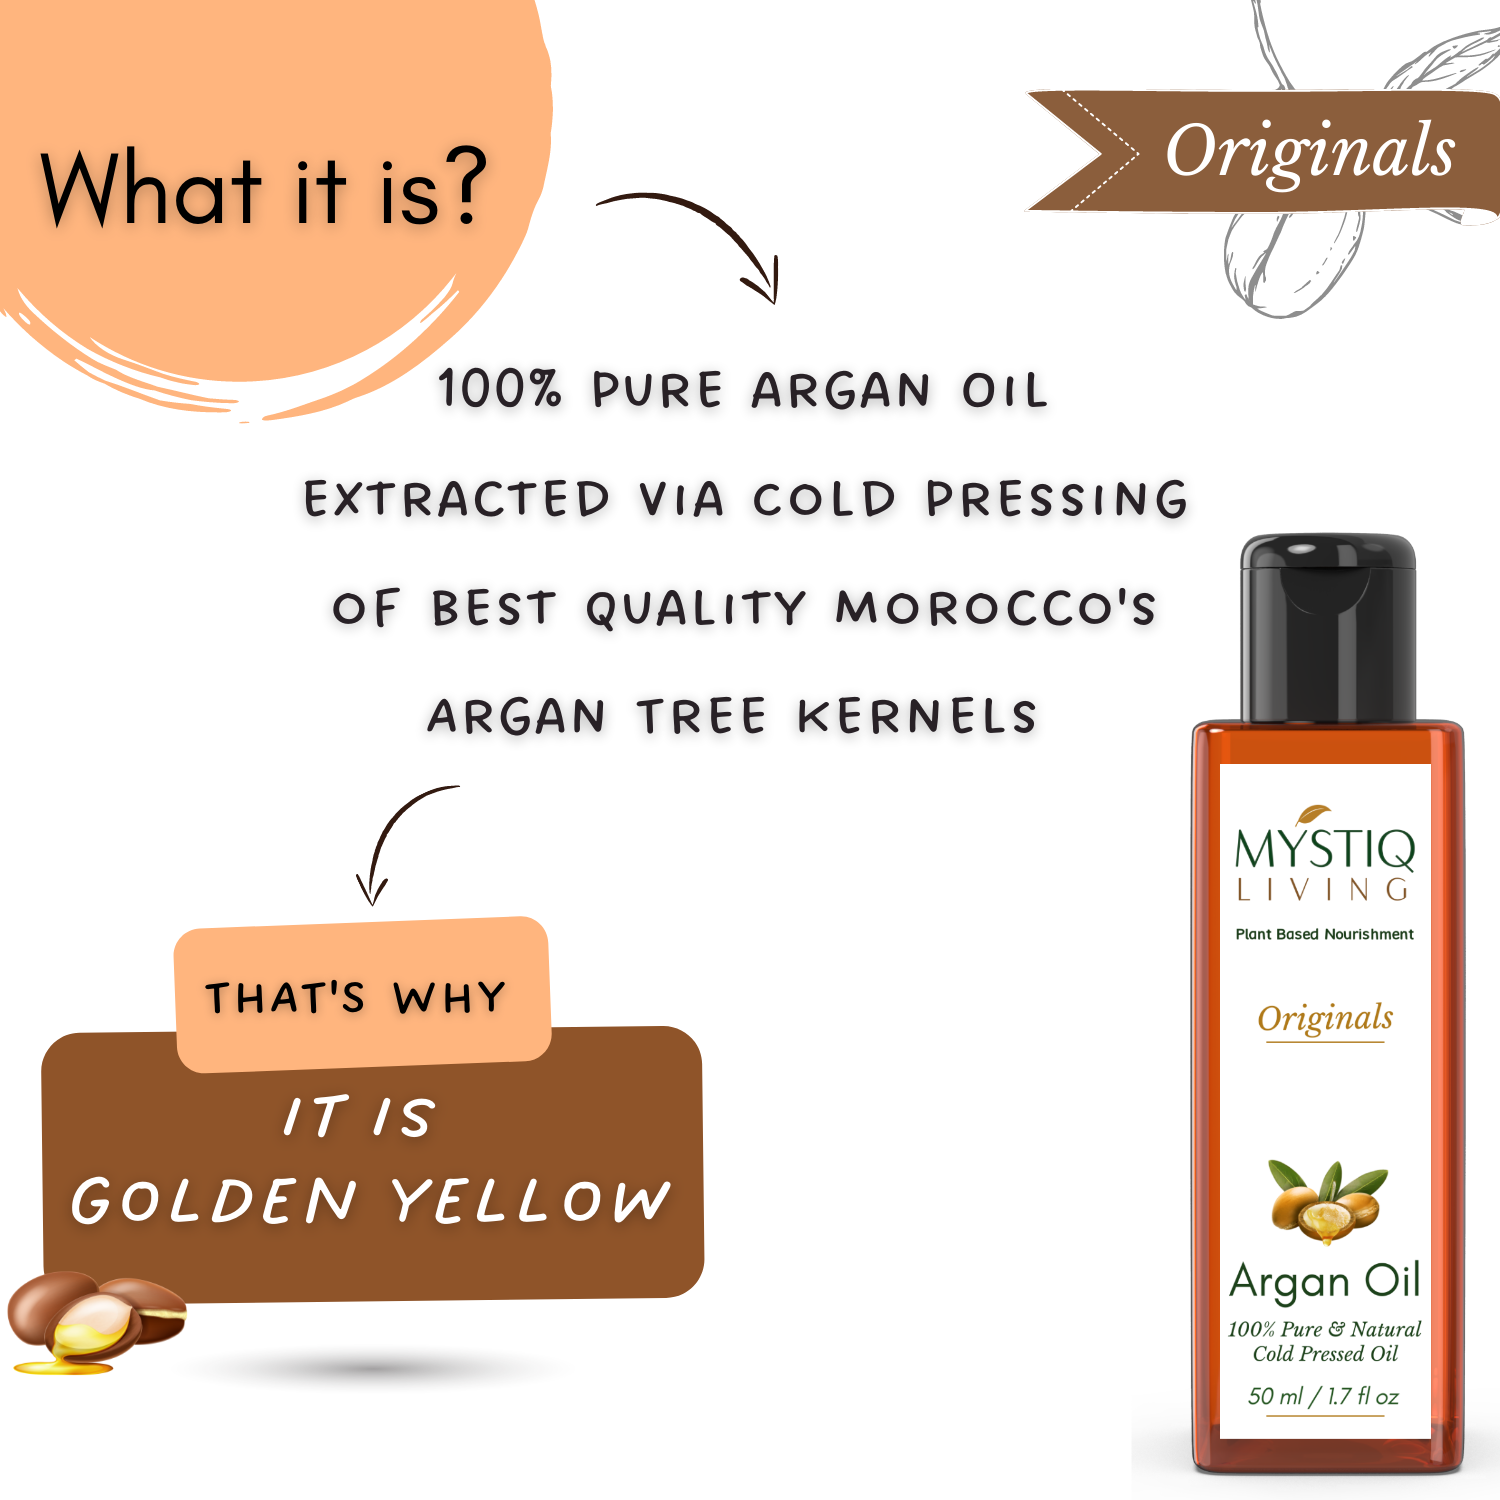 cold pressed oil extracted from argan tree kernels